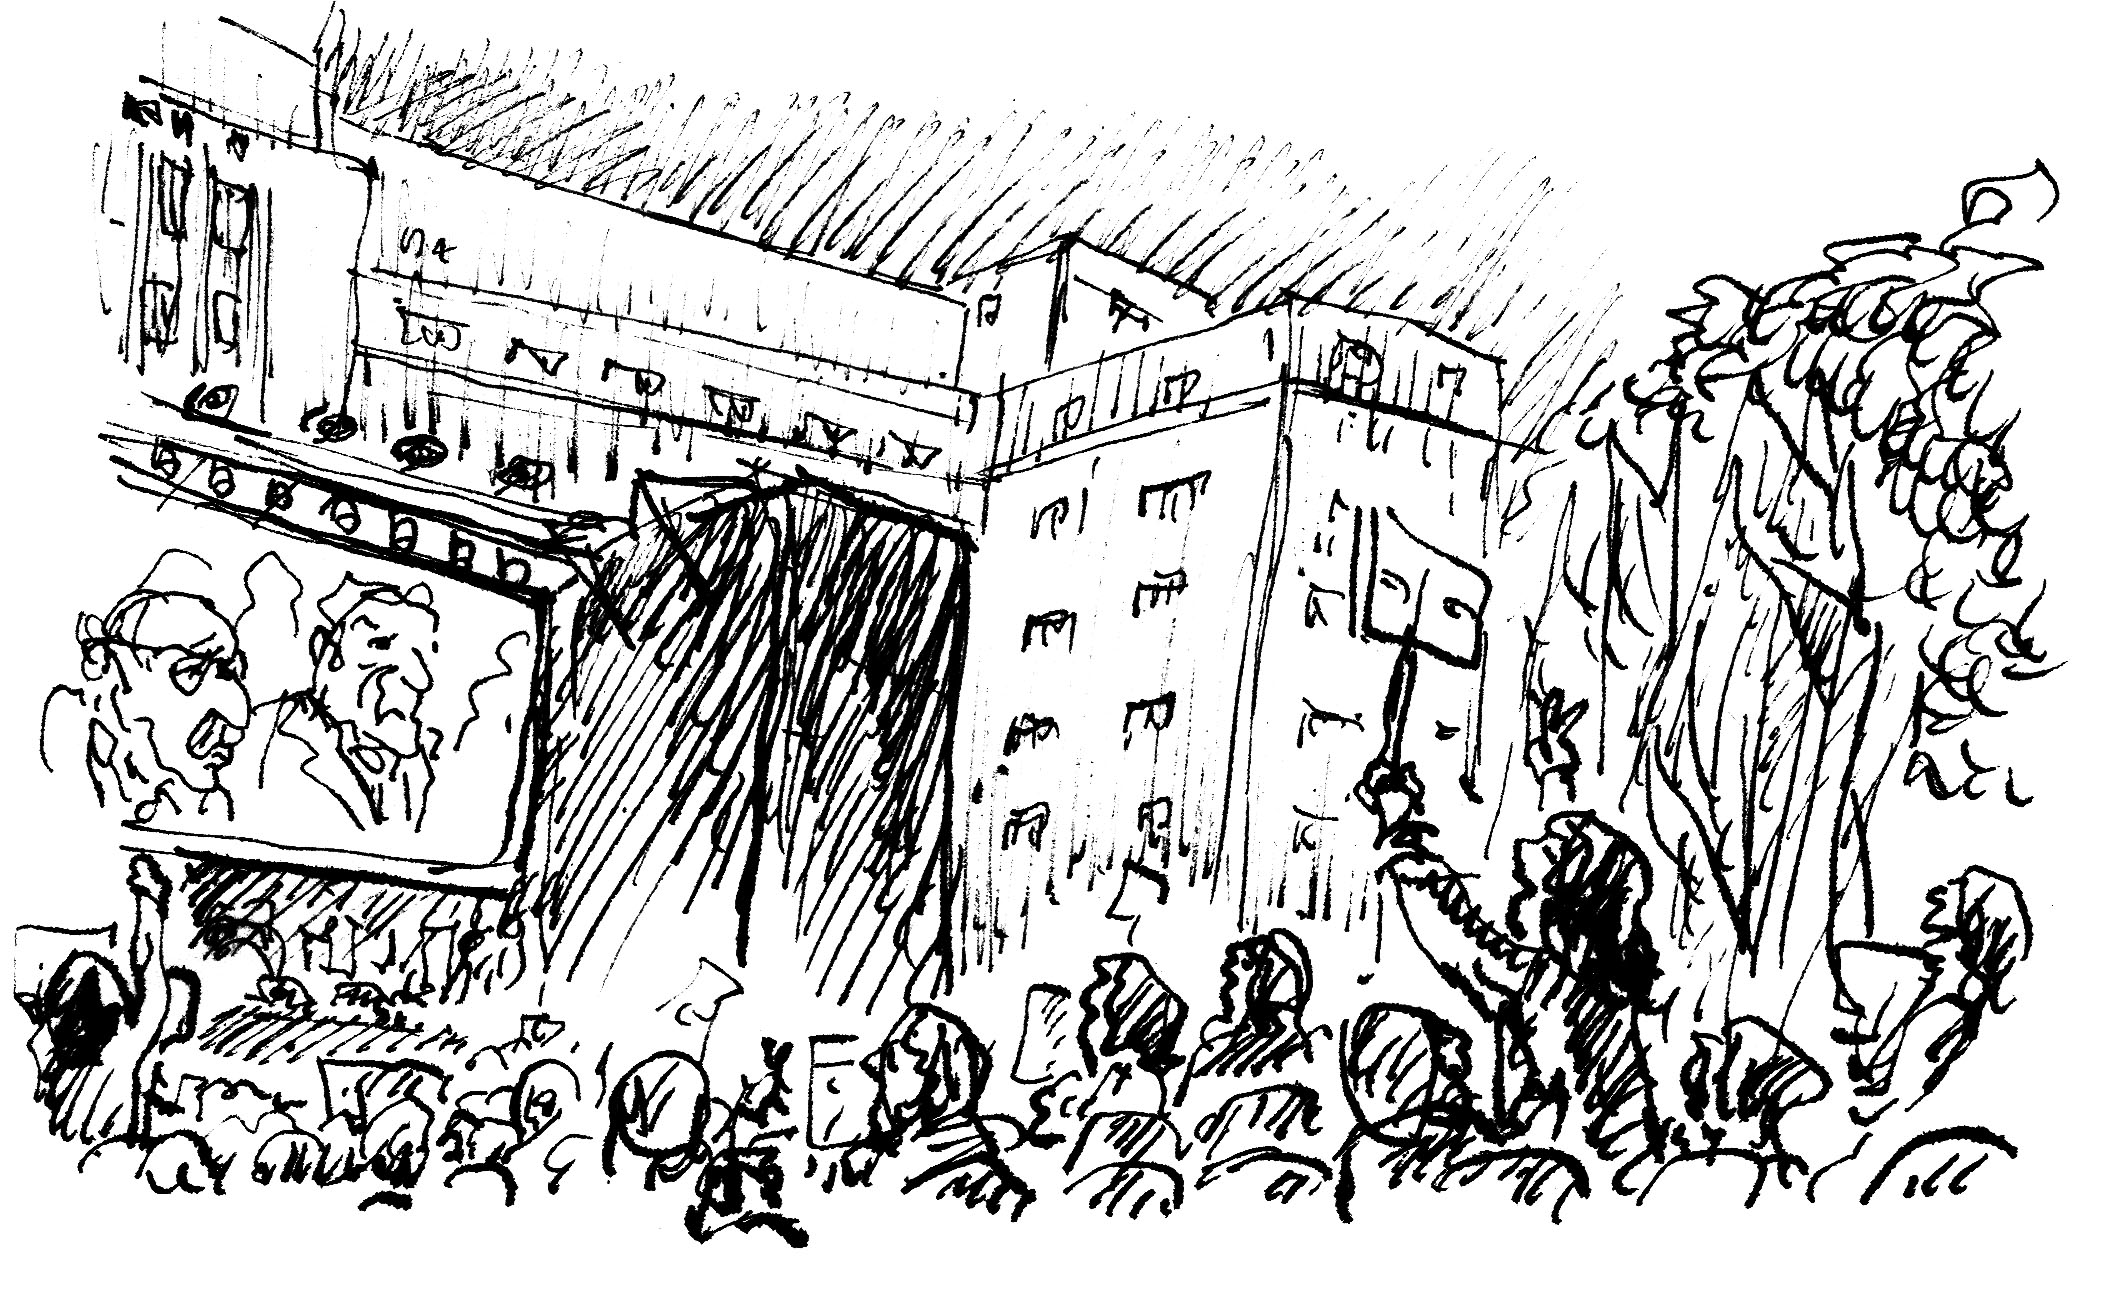 Drawing of a building and people outside, protesting